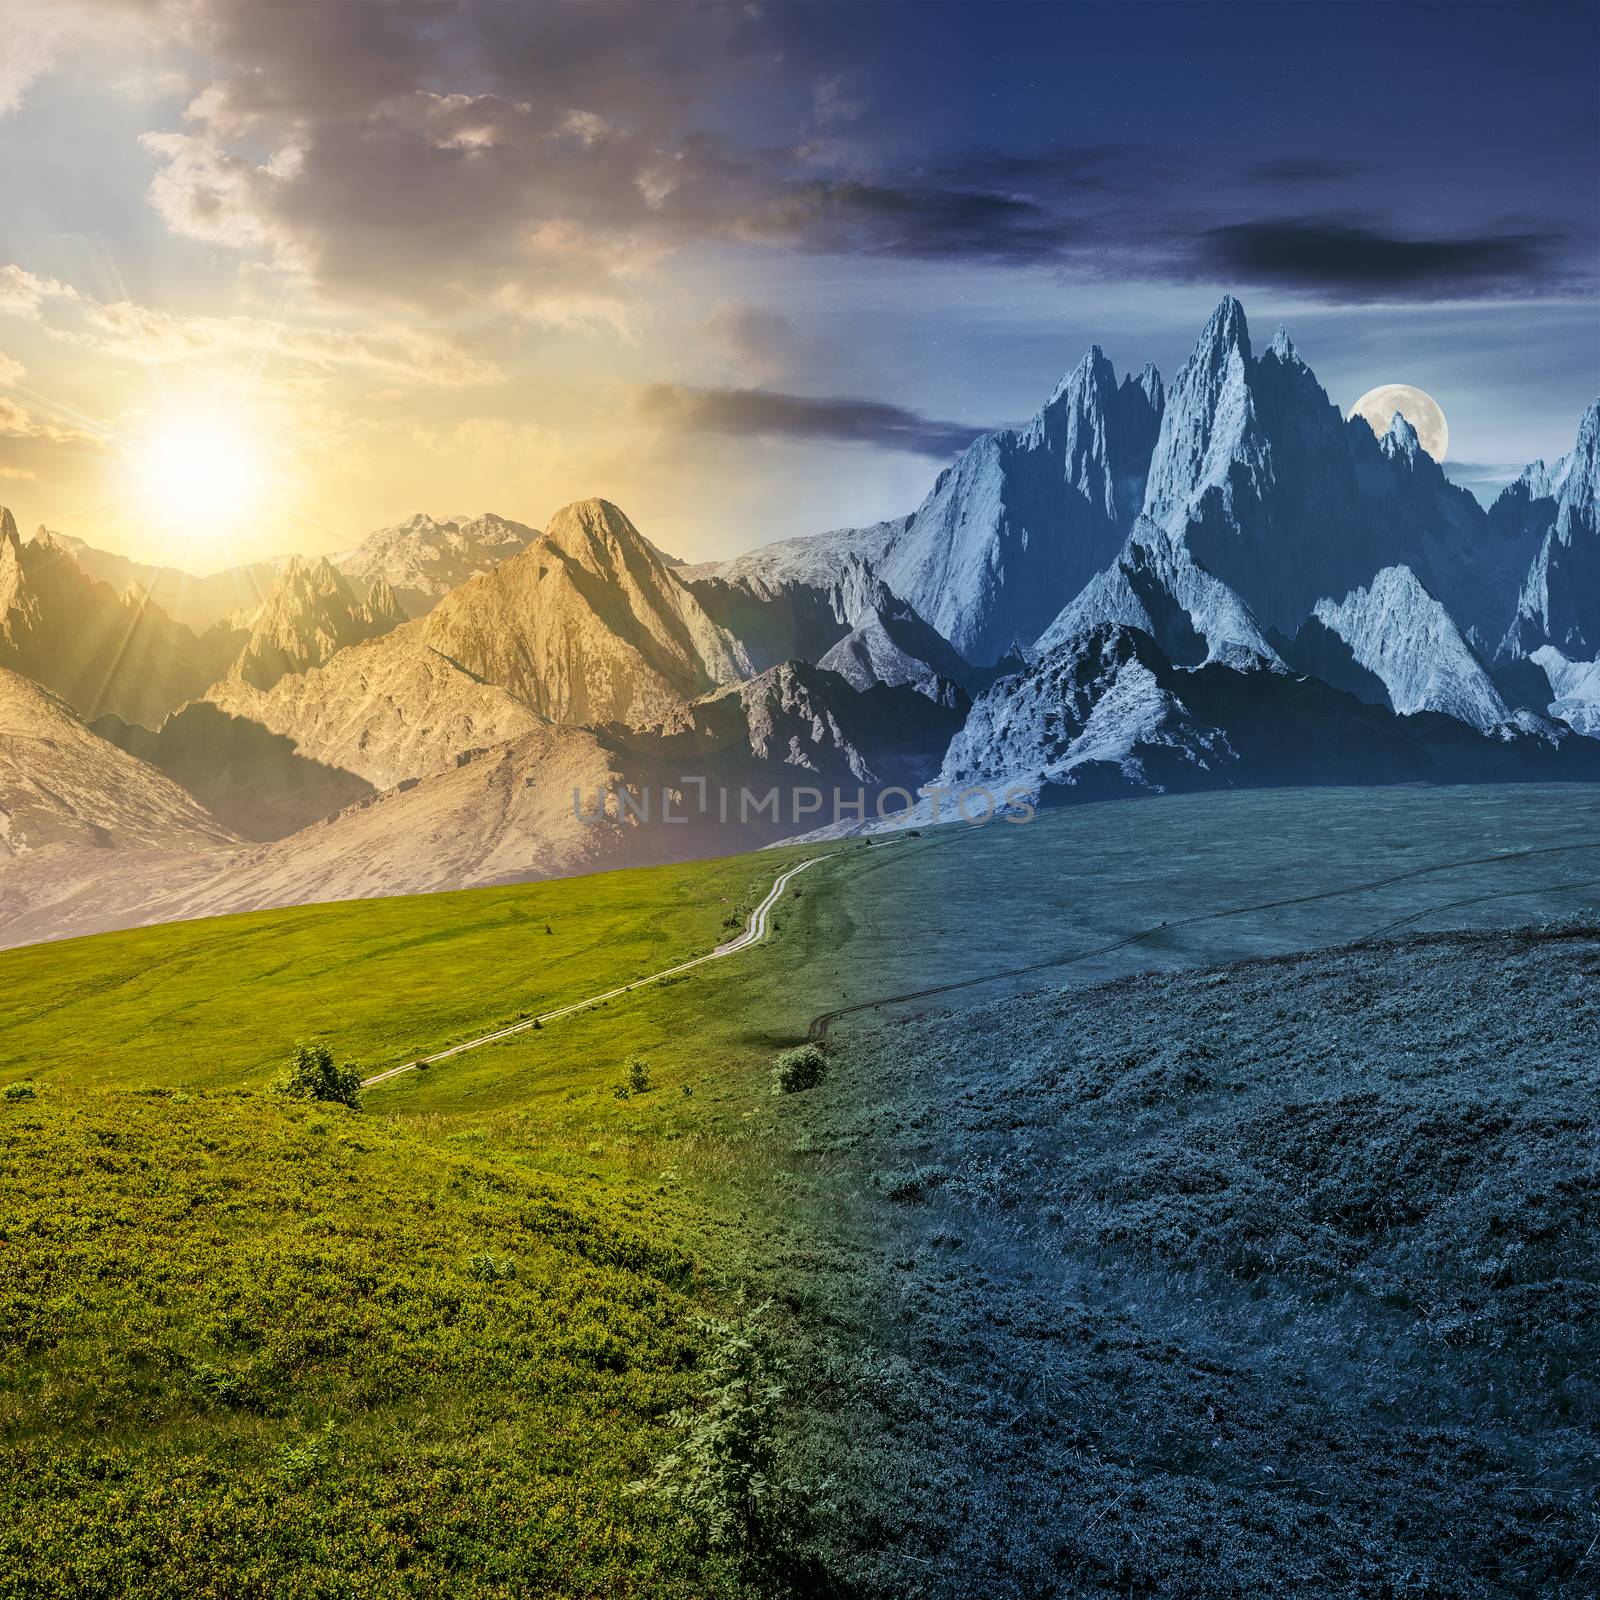 day and night time change concept. grassy slopes and rocky peaks composite. gorgeous summer landscape with magnificent mountain ridge over the pleasing green meadows. lovely surreal fantasy scenery